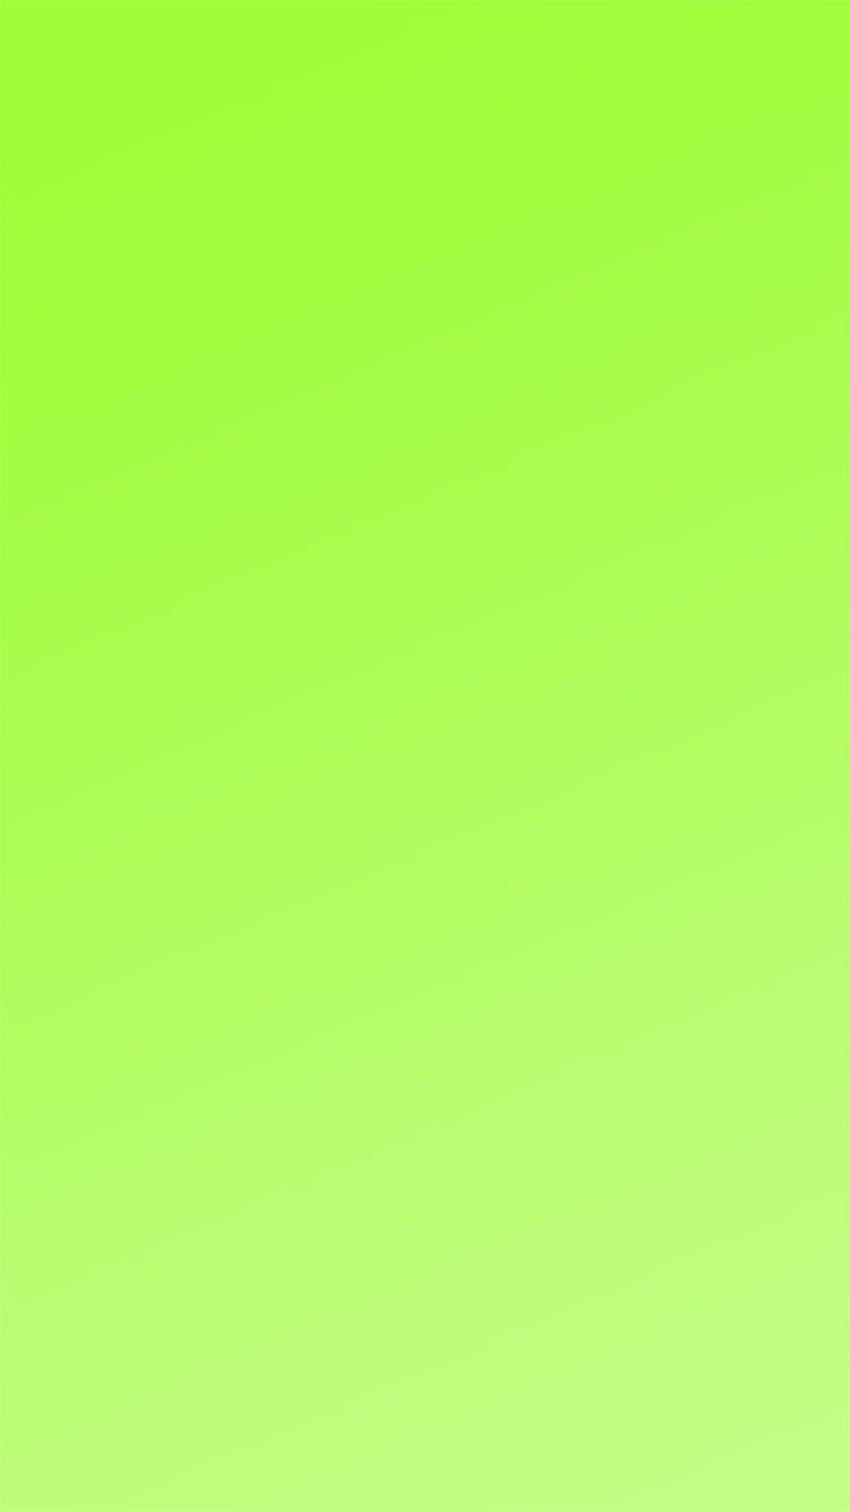 Lime green iPhone 6/6 plus and backgrounds HD phone wallpaper